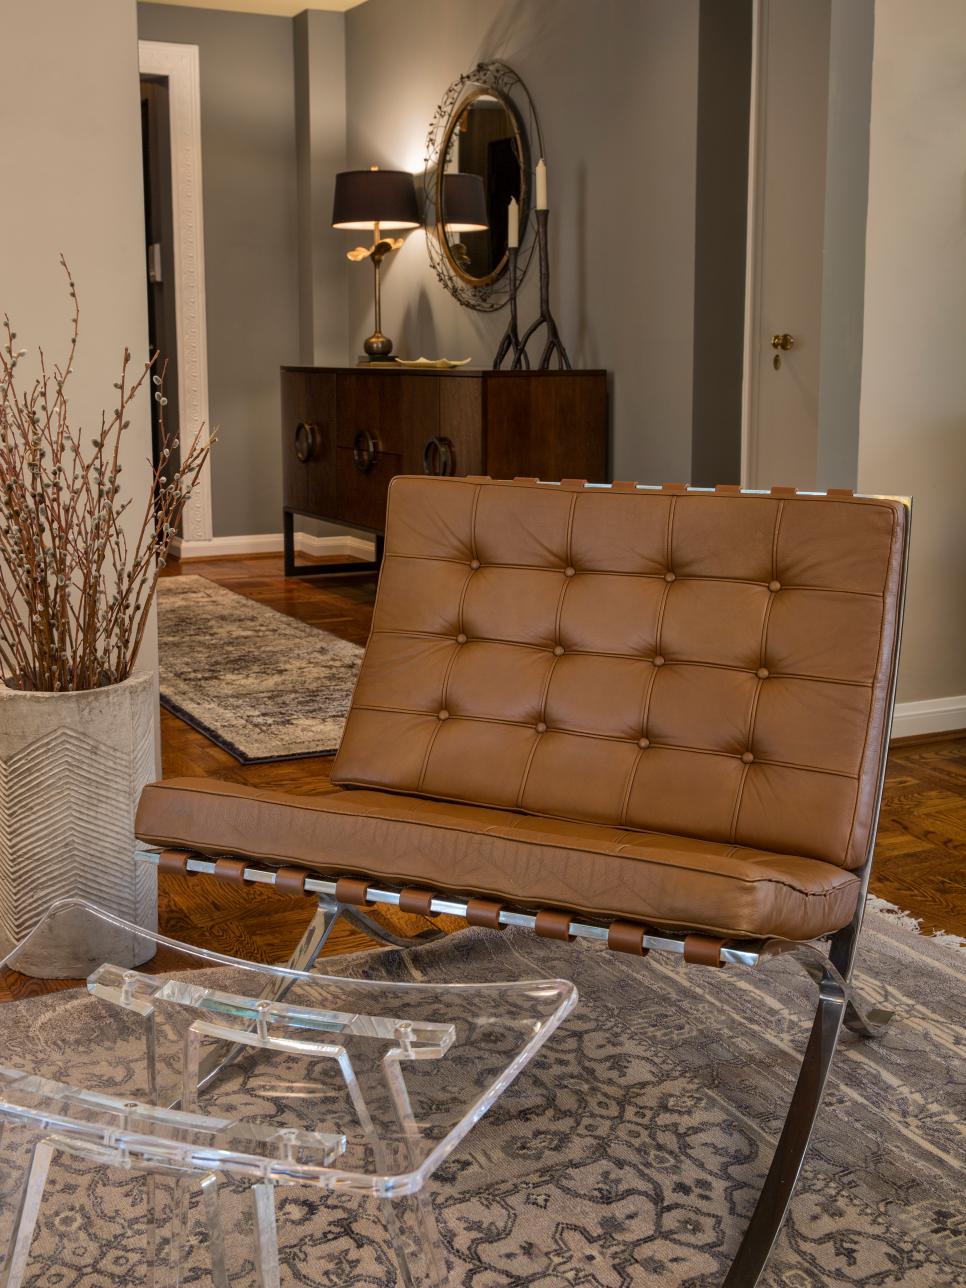 Barcelona Chair and Lucite Footstool in Traditional Room | HGTV